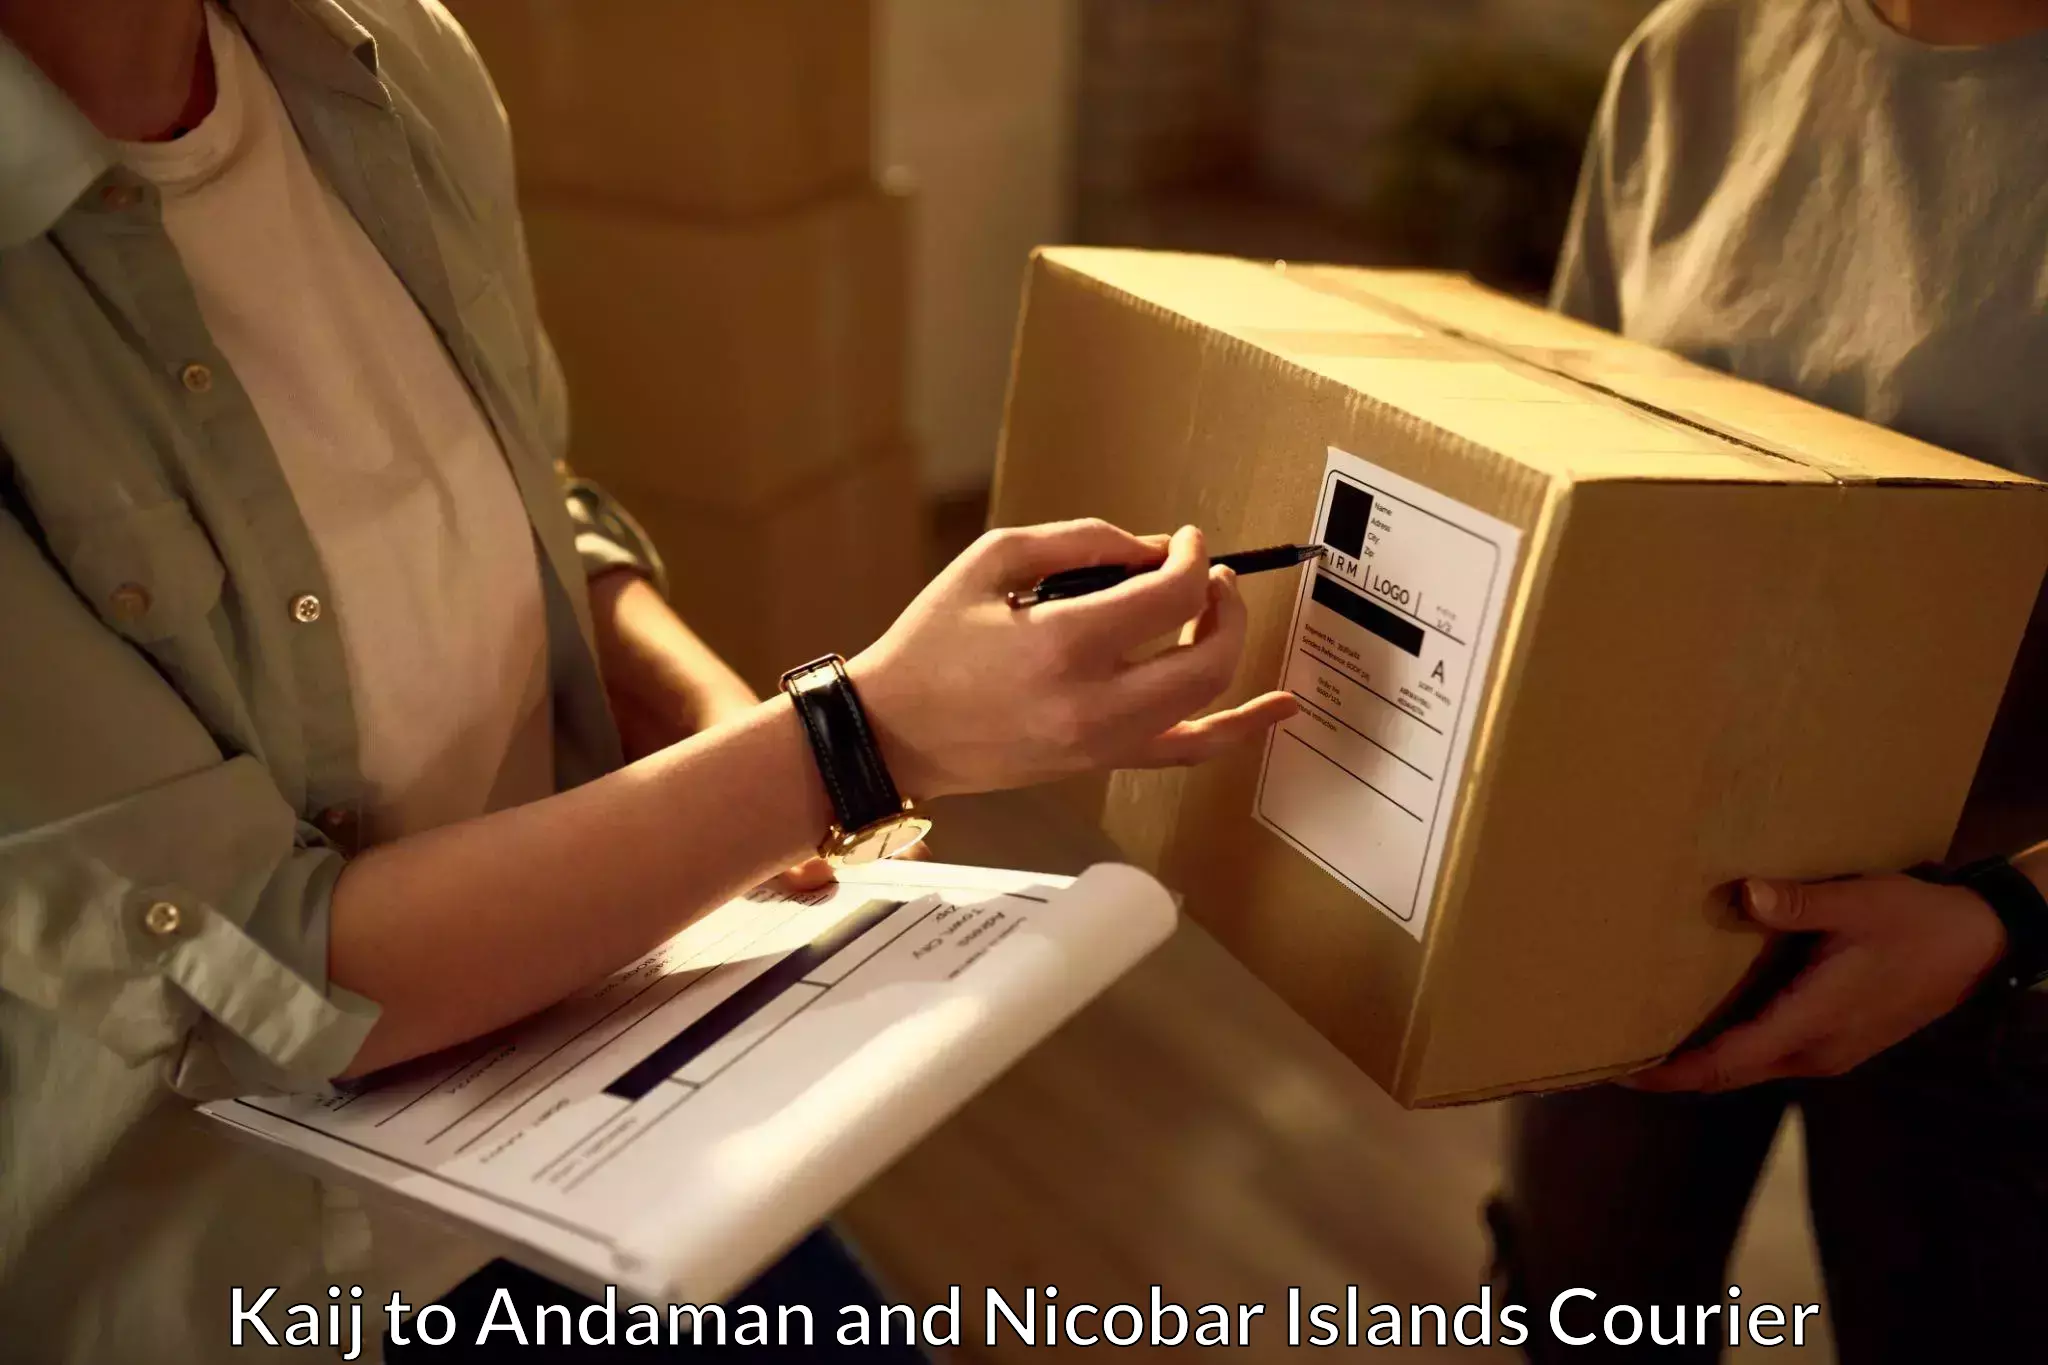 On-call courier service Kaij to Andaman and Nicobar Islands